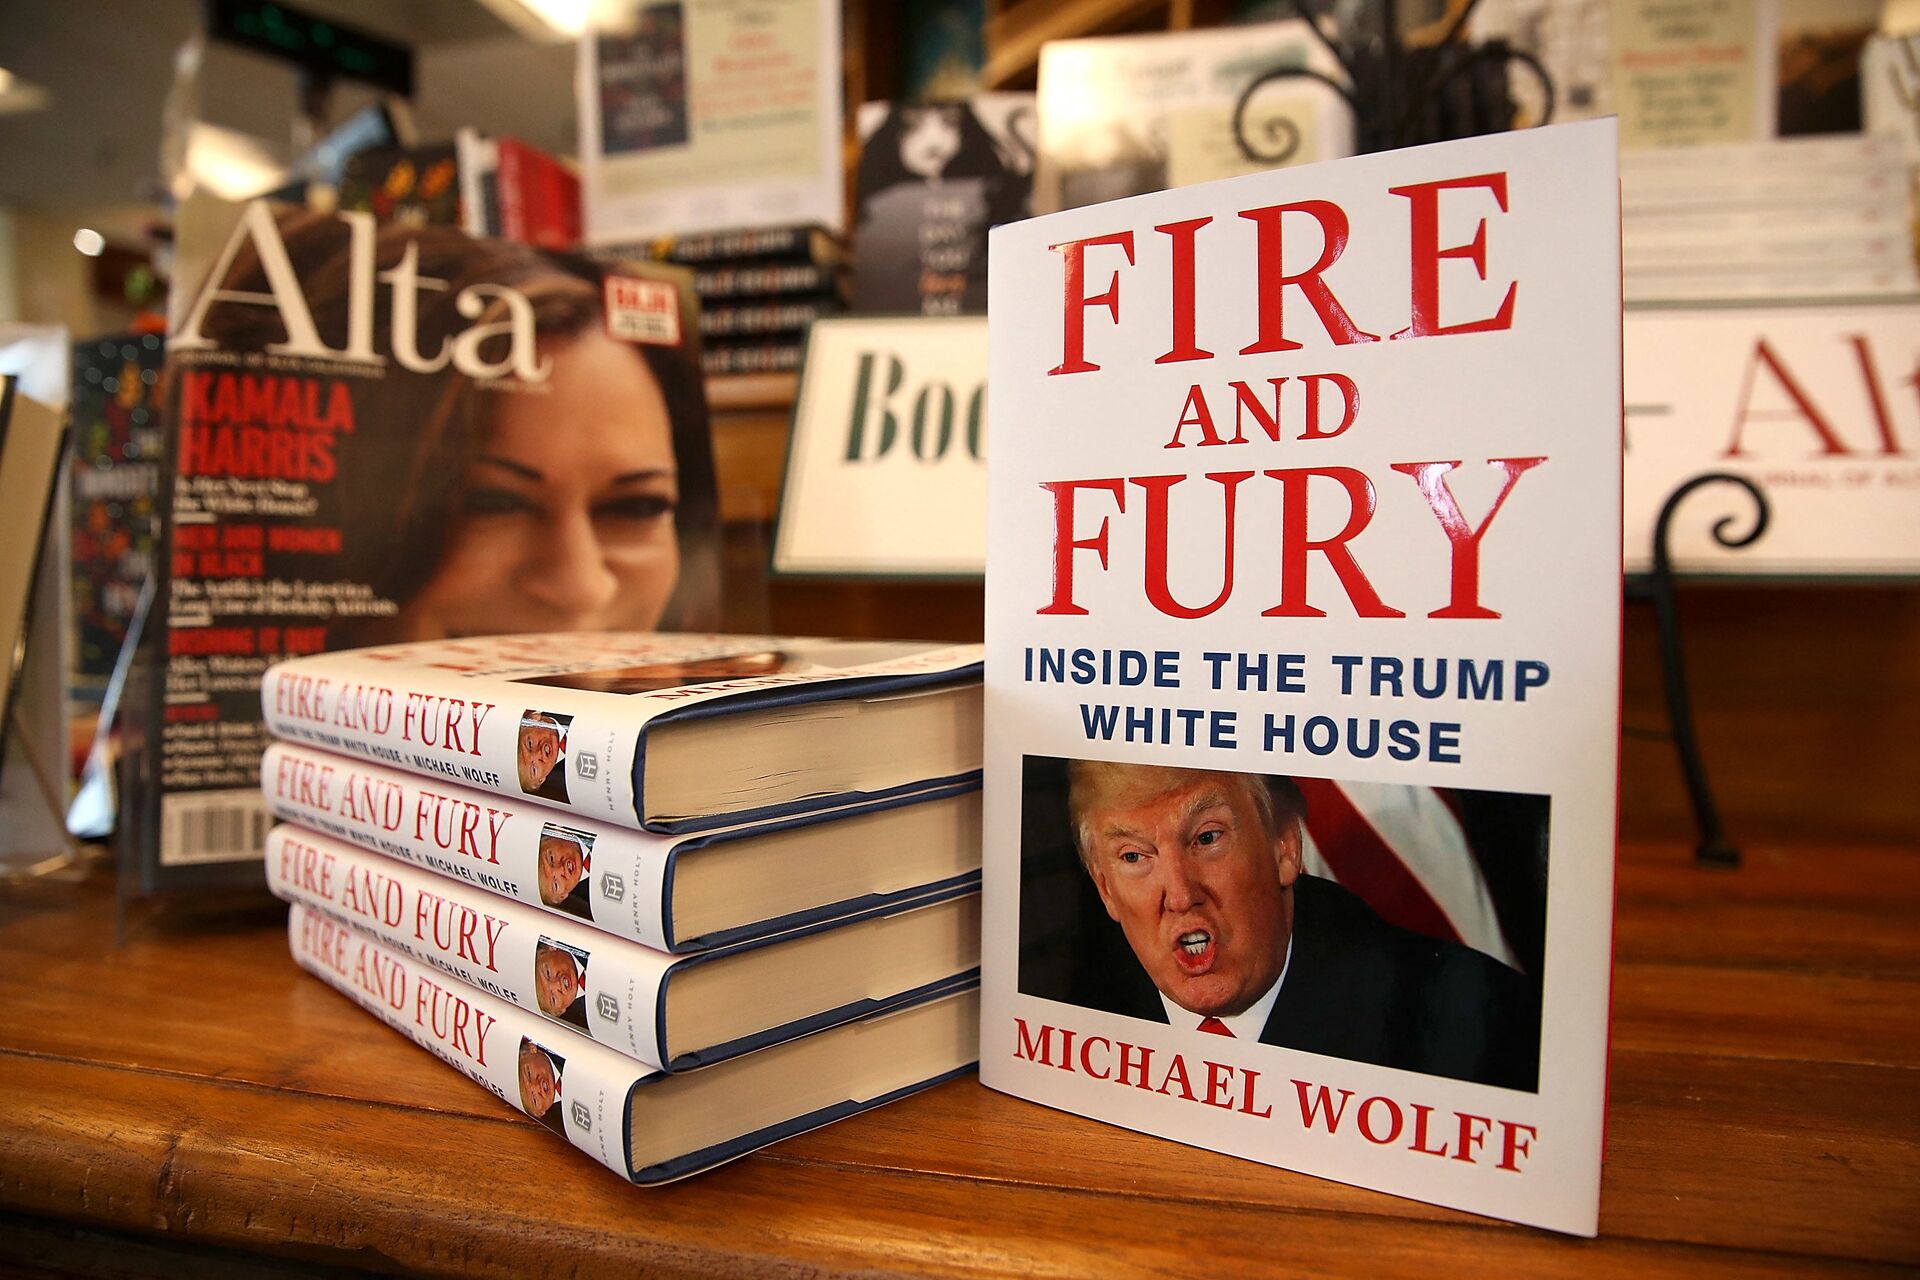 Copies of the book Fire and Fury by author Michael Wolff are displayed on a shelf at Book Passage on January 5, 2018 in Corte Madera, California. - Sputnik International, 1920, 07.09.2021